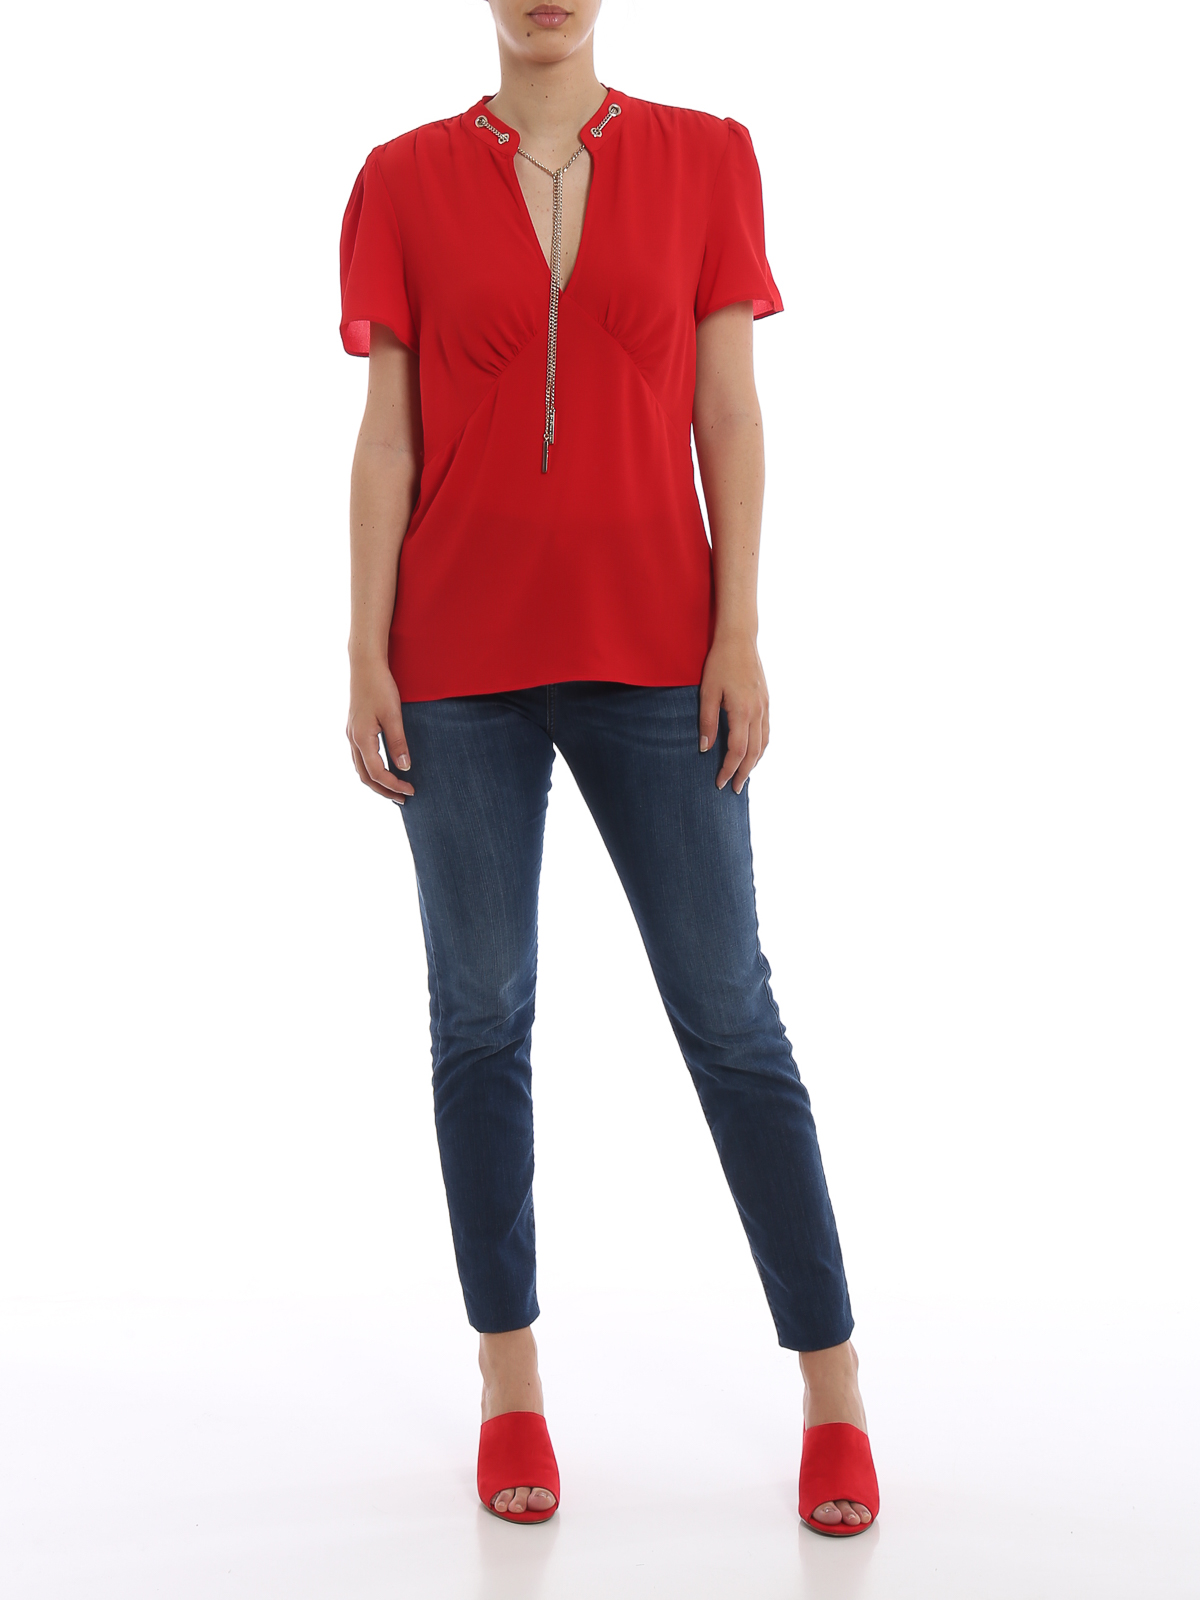 Blouses Michael Kors - Red blouse with gold-tone chain - MS94LTC4YP610